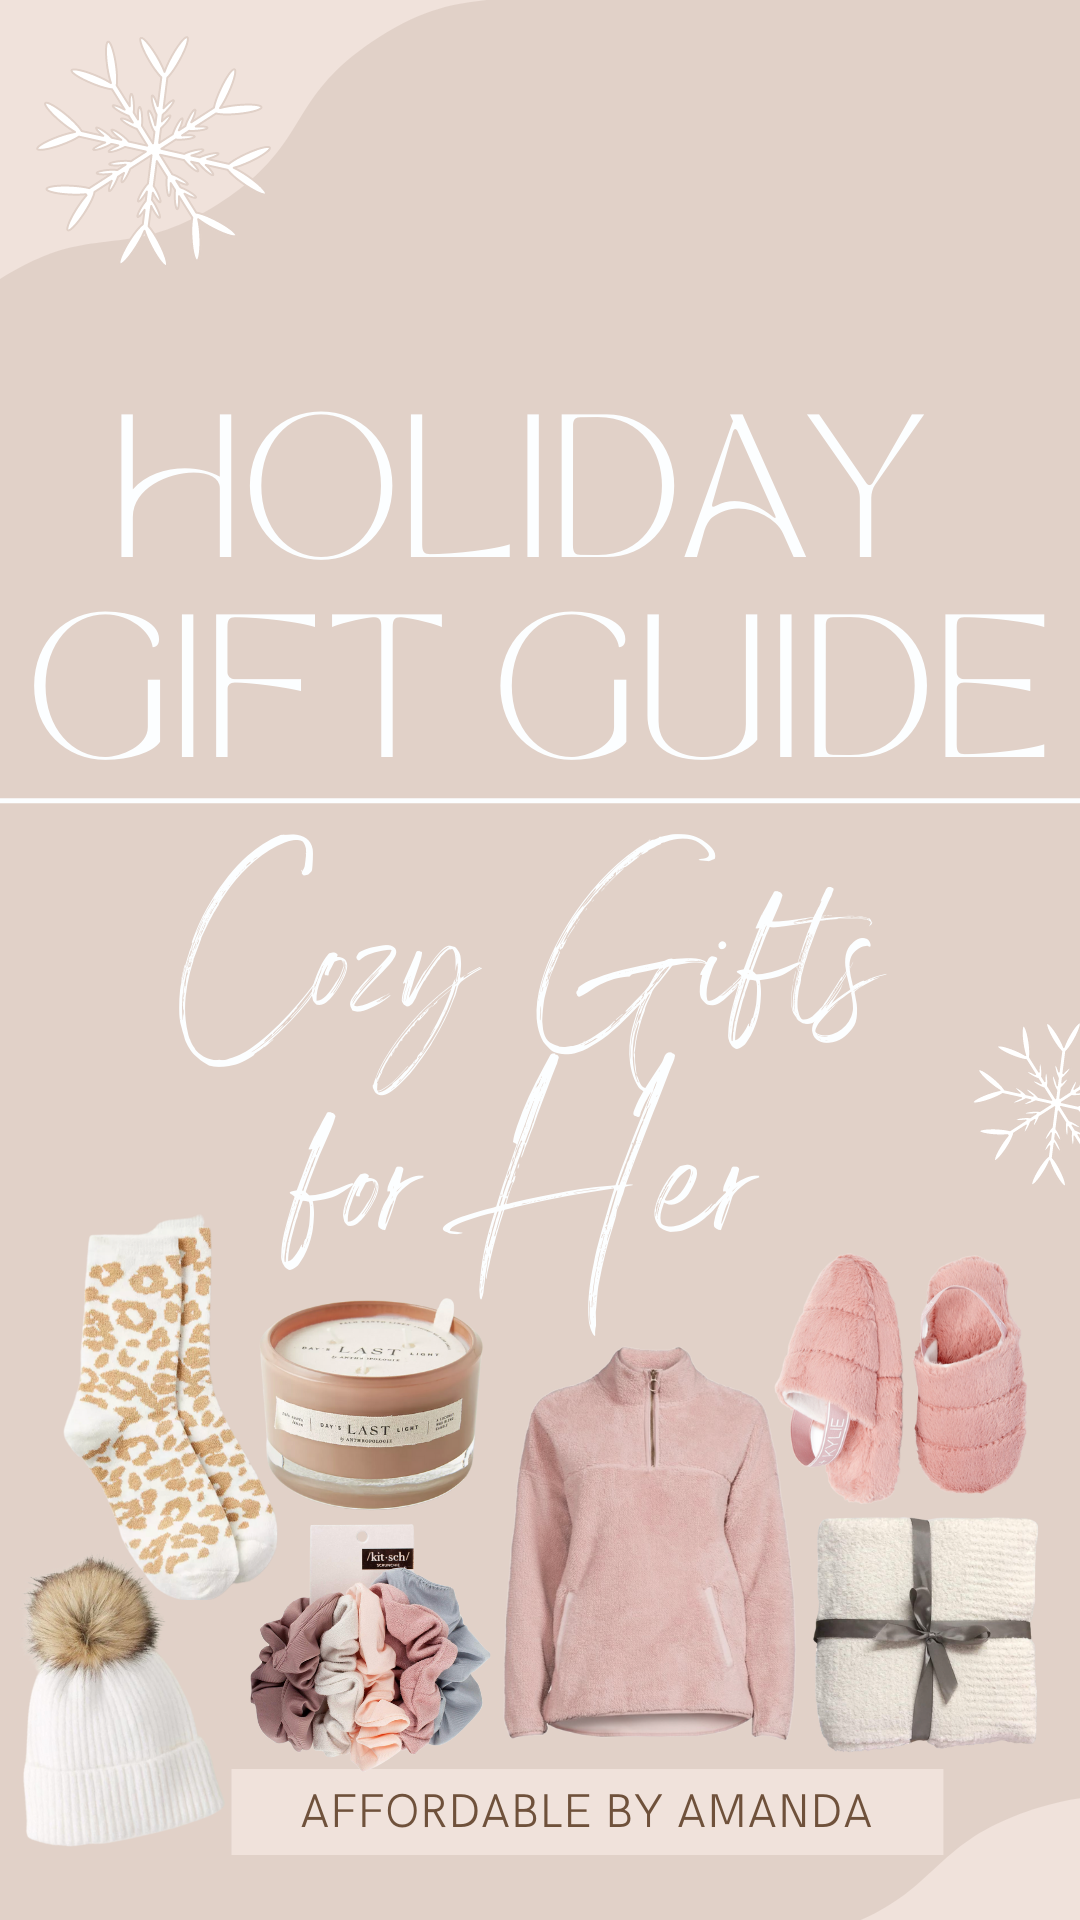 Cozy Gifts